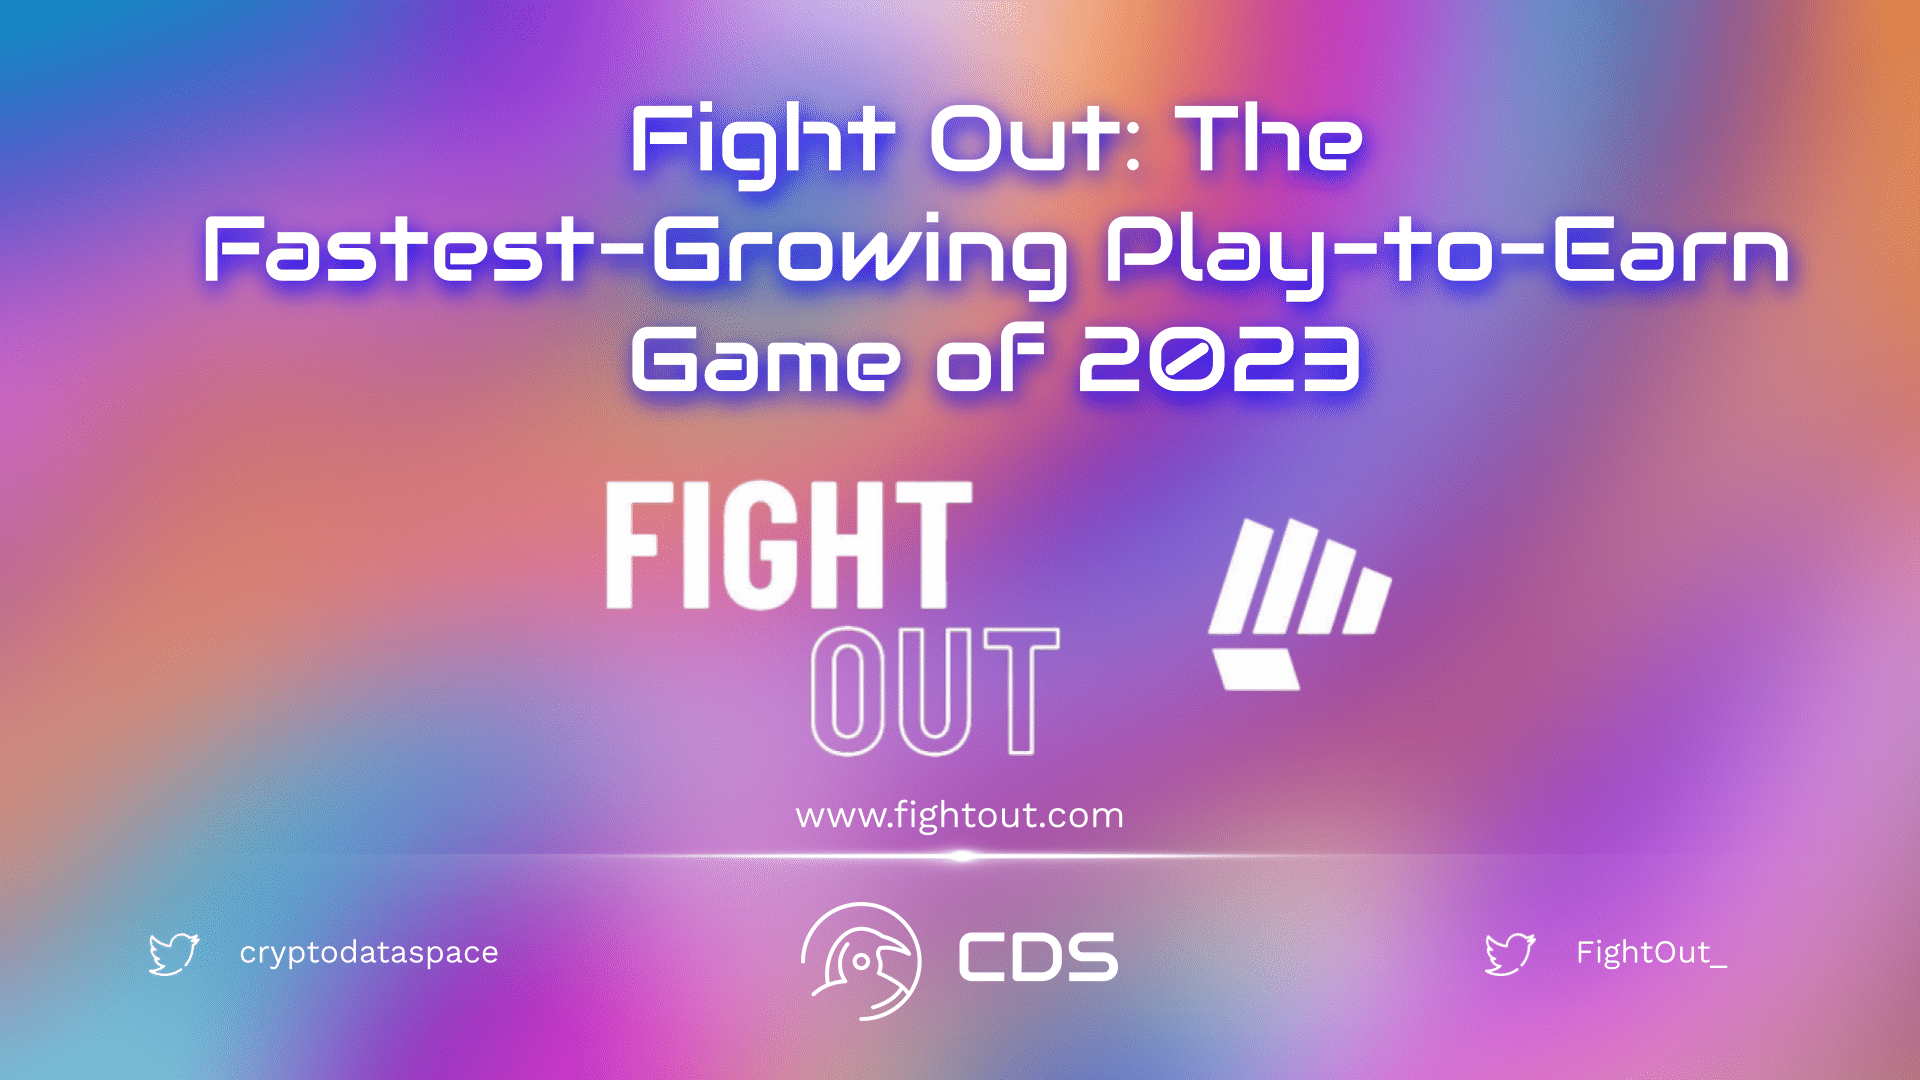 Fight Out The Fastest-Growing Play-to-Earn Game of 2023